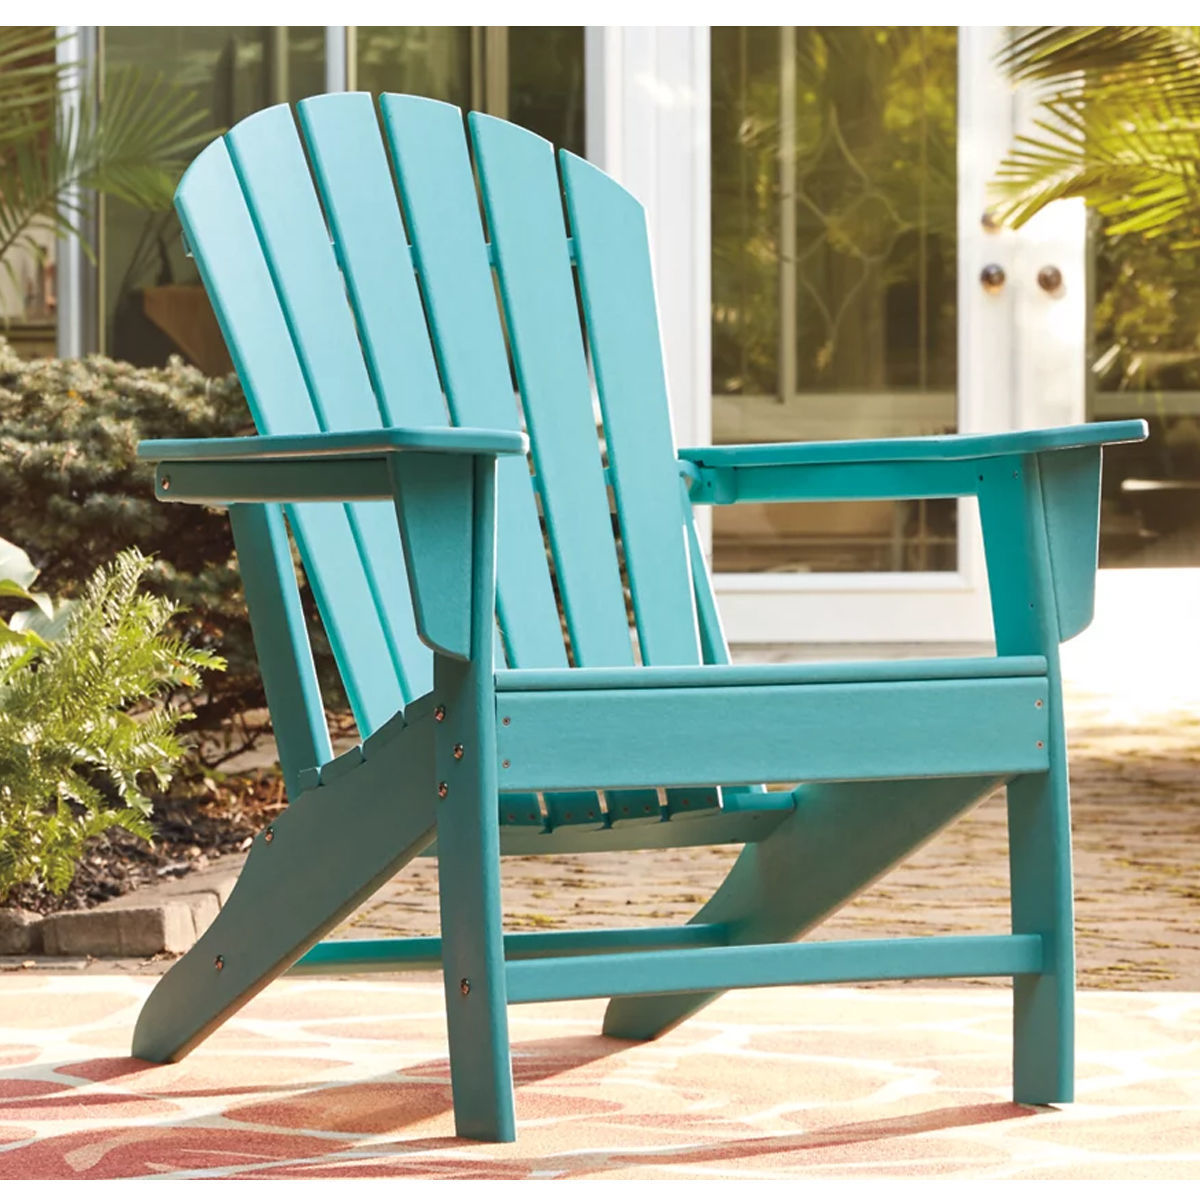 Picture of TEAL ADIRONDACK CHAIR